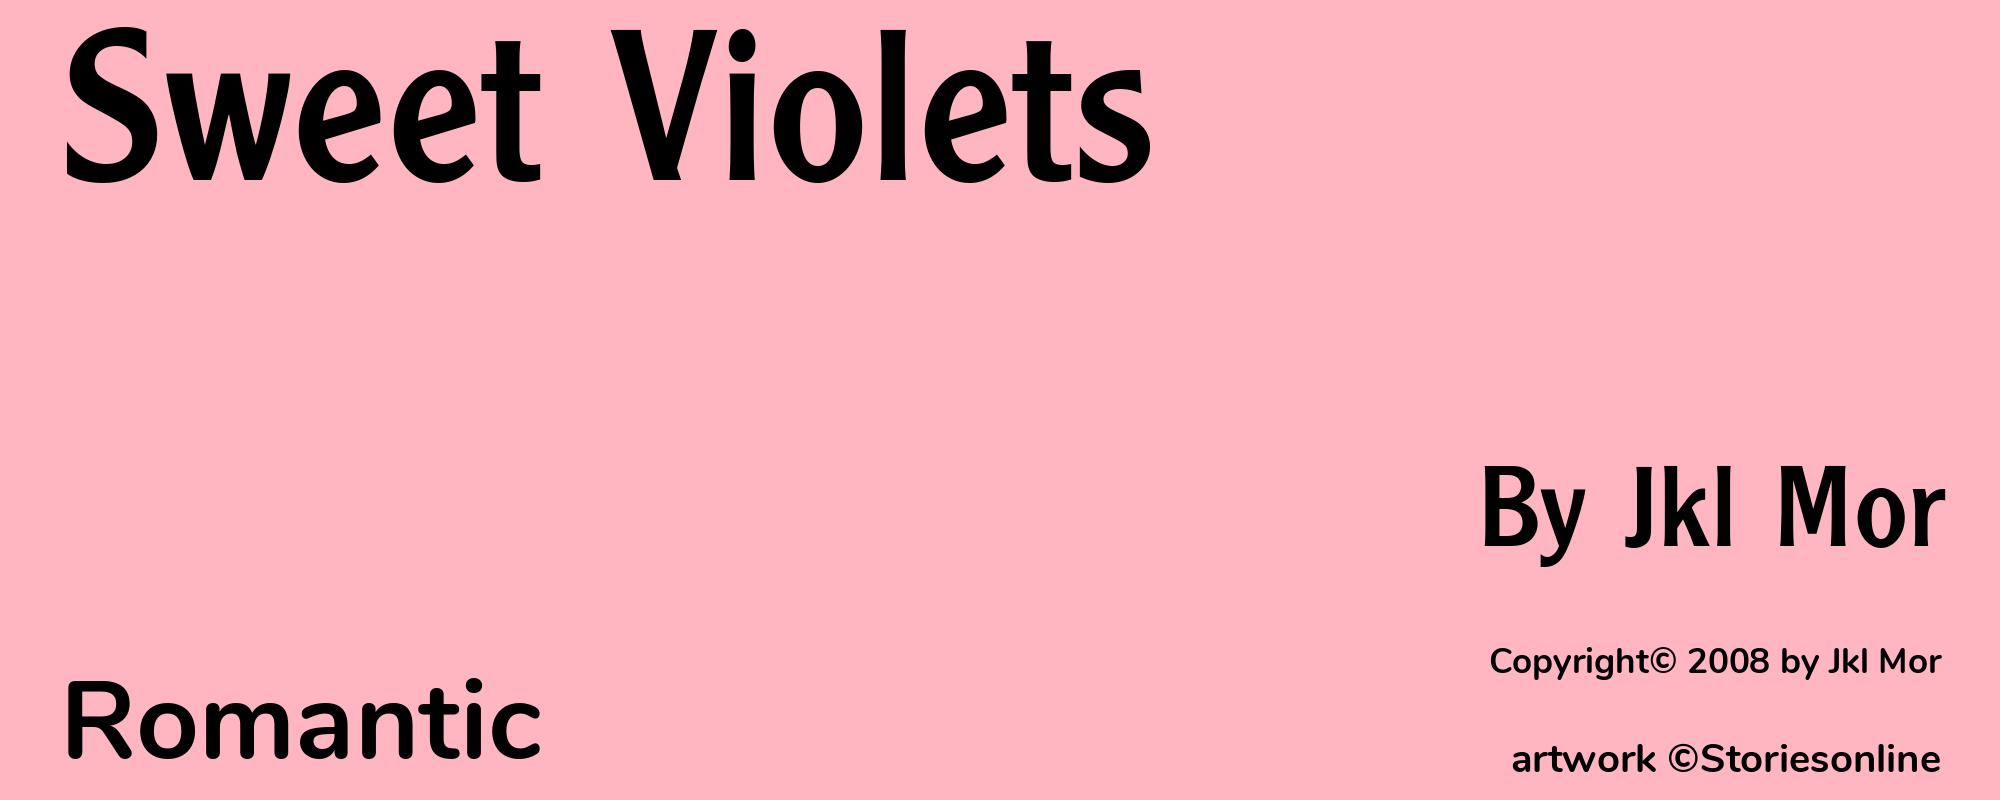 Sweet Violets - Cover